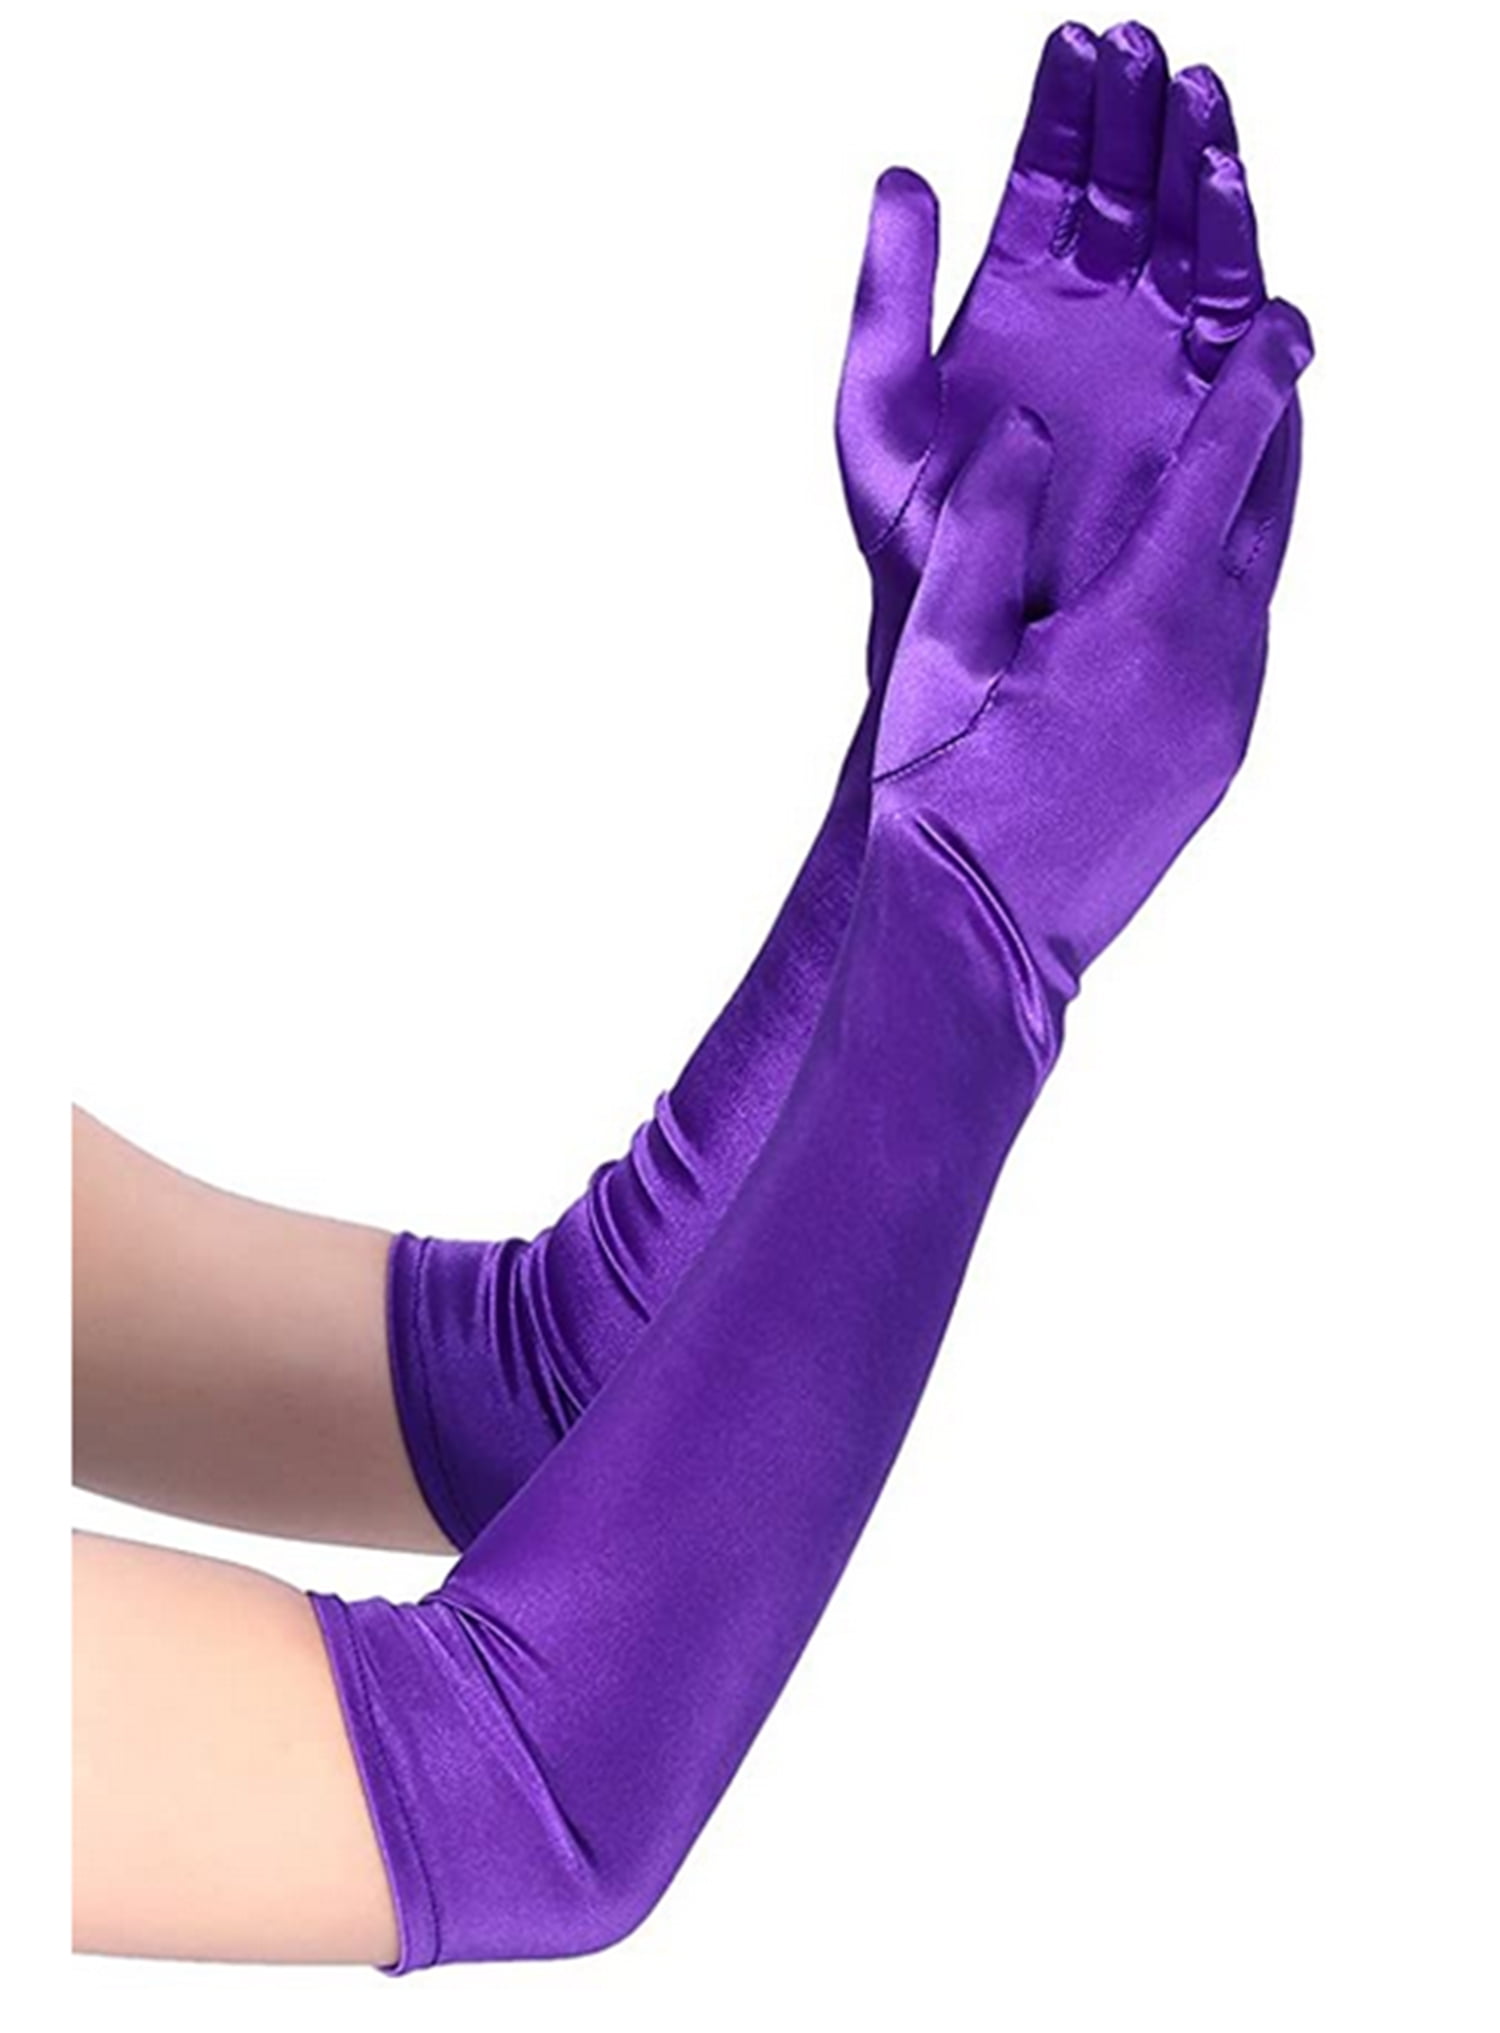 ONE SIZE BRAND NEW WOMENS LADIES PURPLE THERMAL FINGERLESS STRETCH GLOVES 